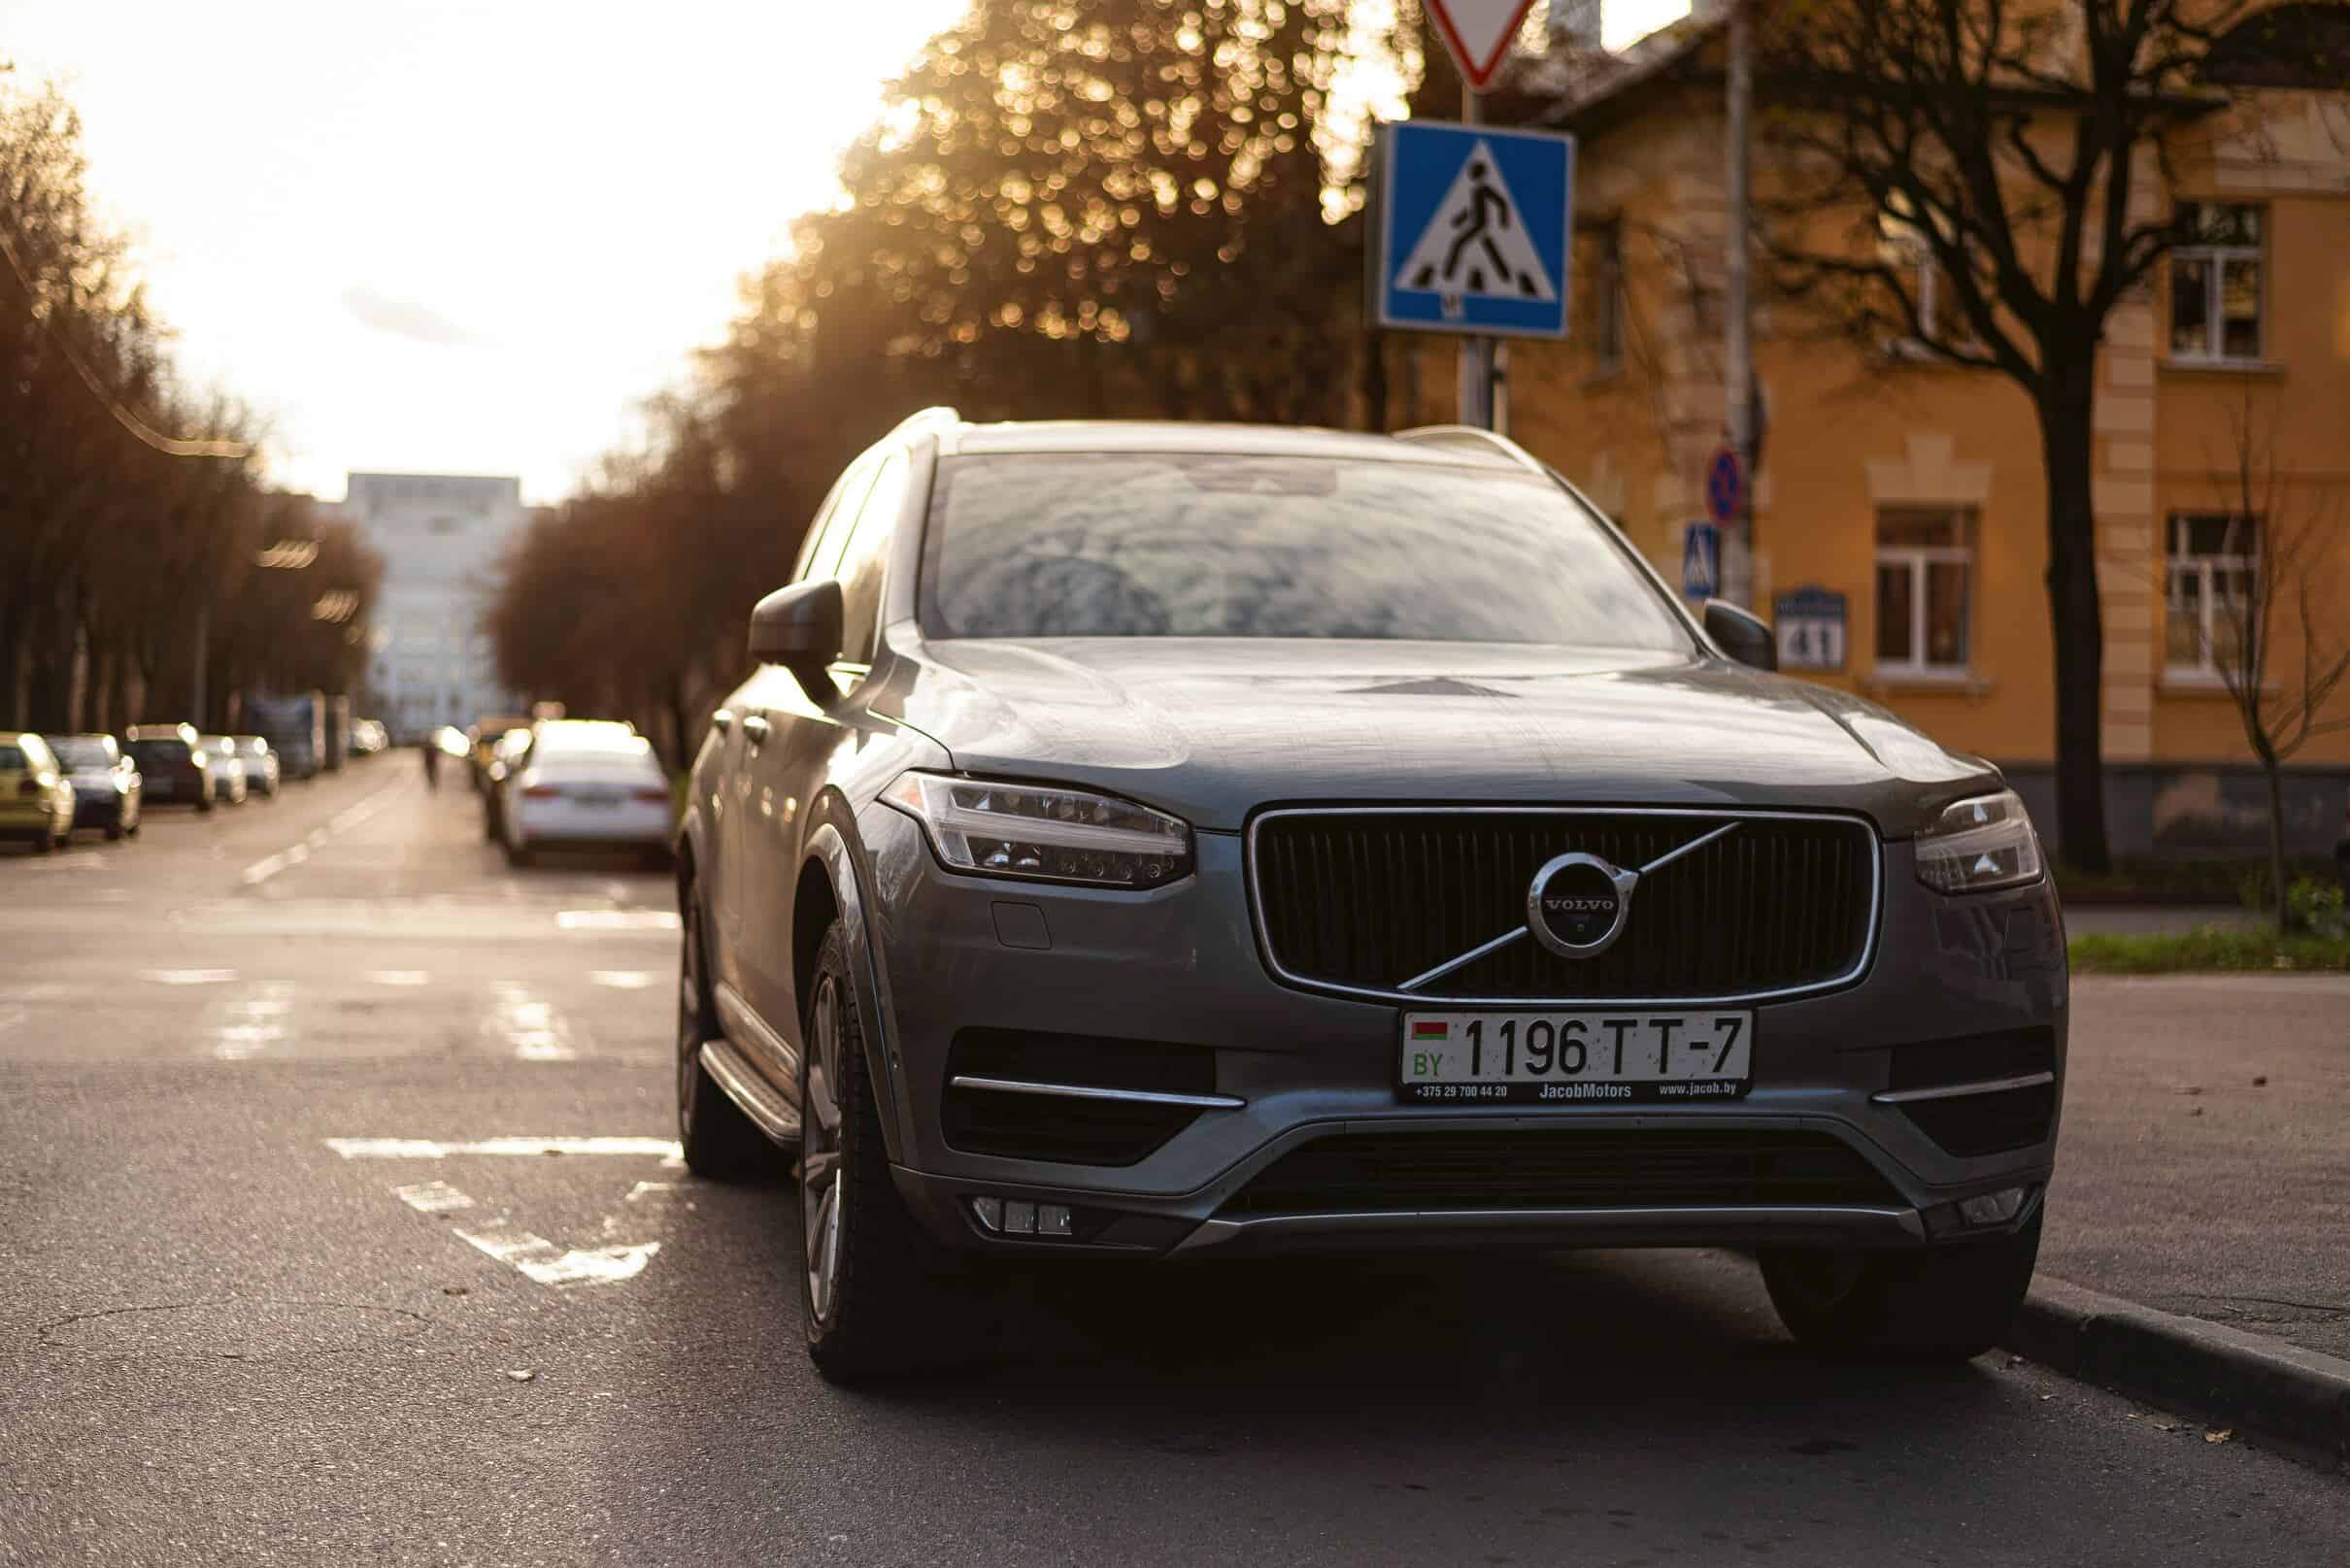 A silver Volvo XC90 SUV parked in an urban environment.